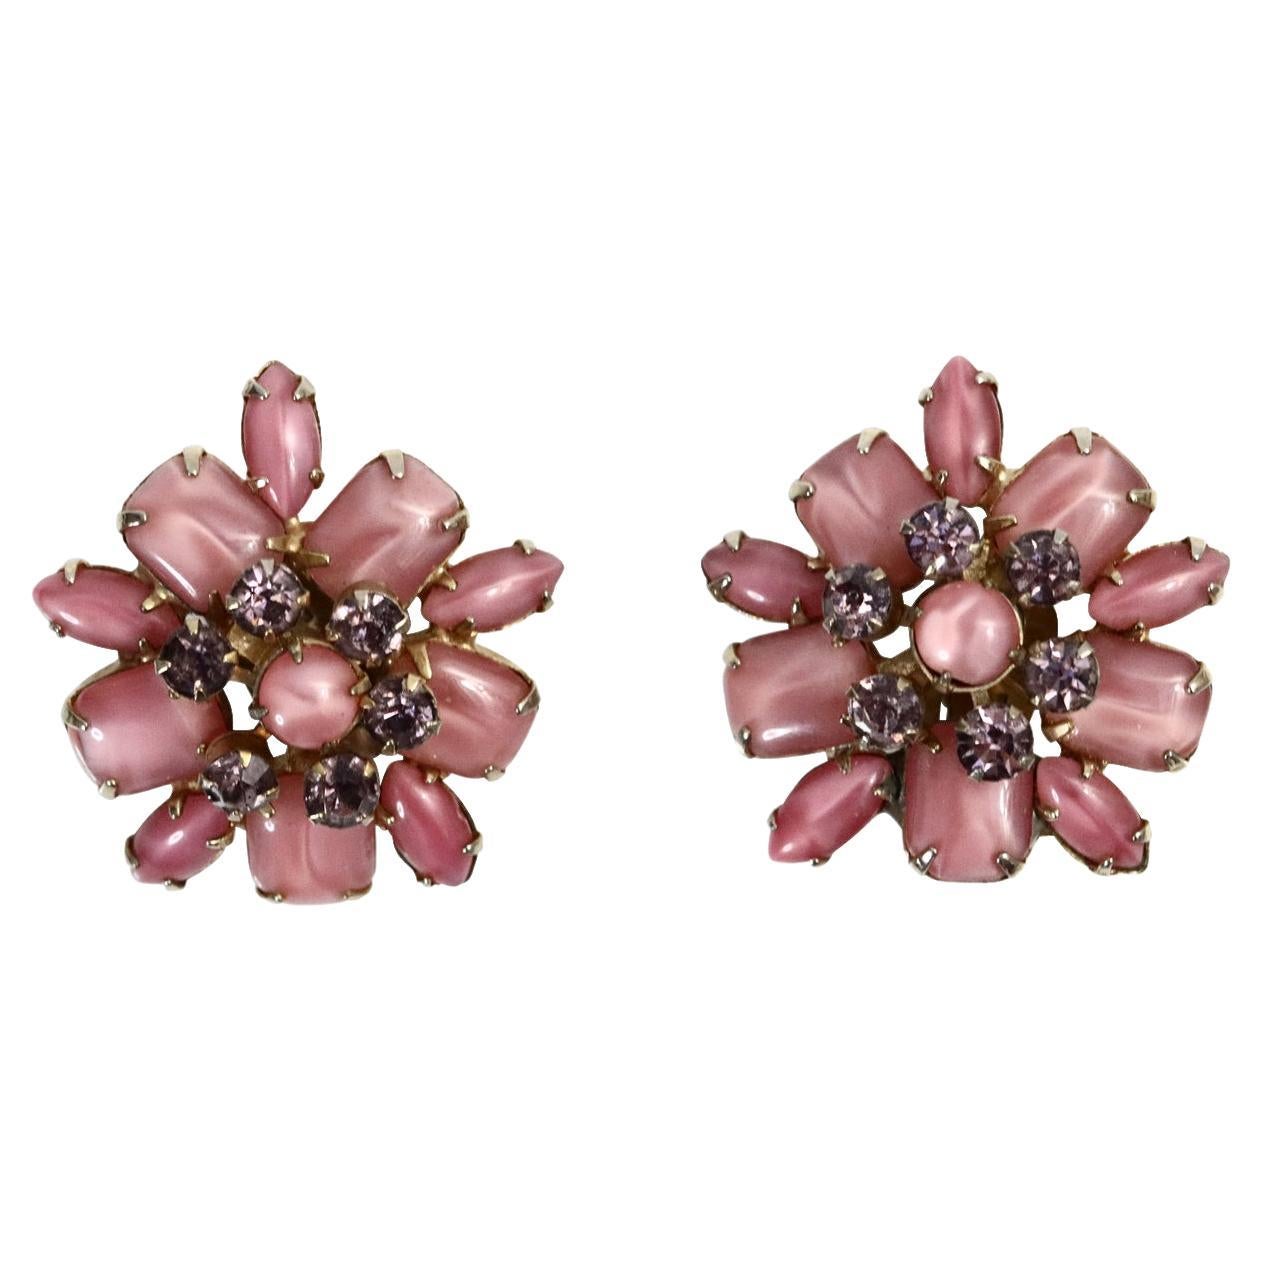 Vintage Gold Pink Opalescent Stones with Grey Diamante Earrings Circa 1960s